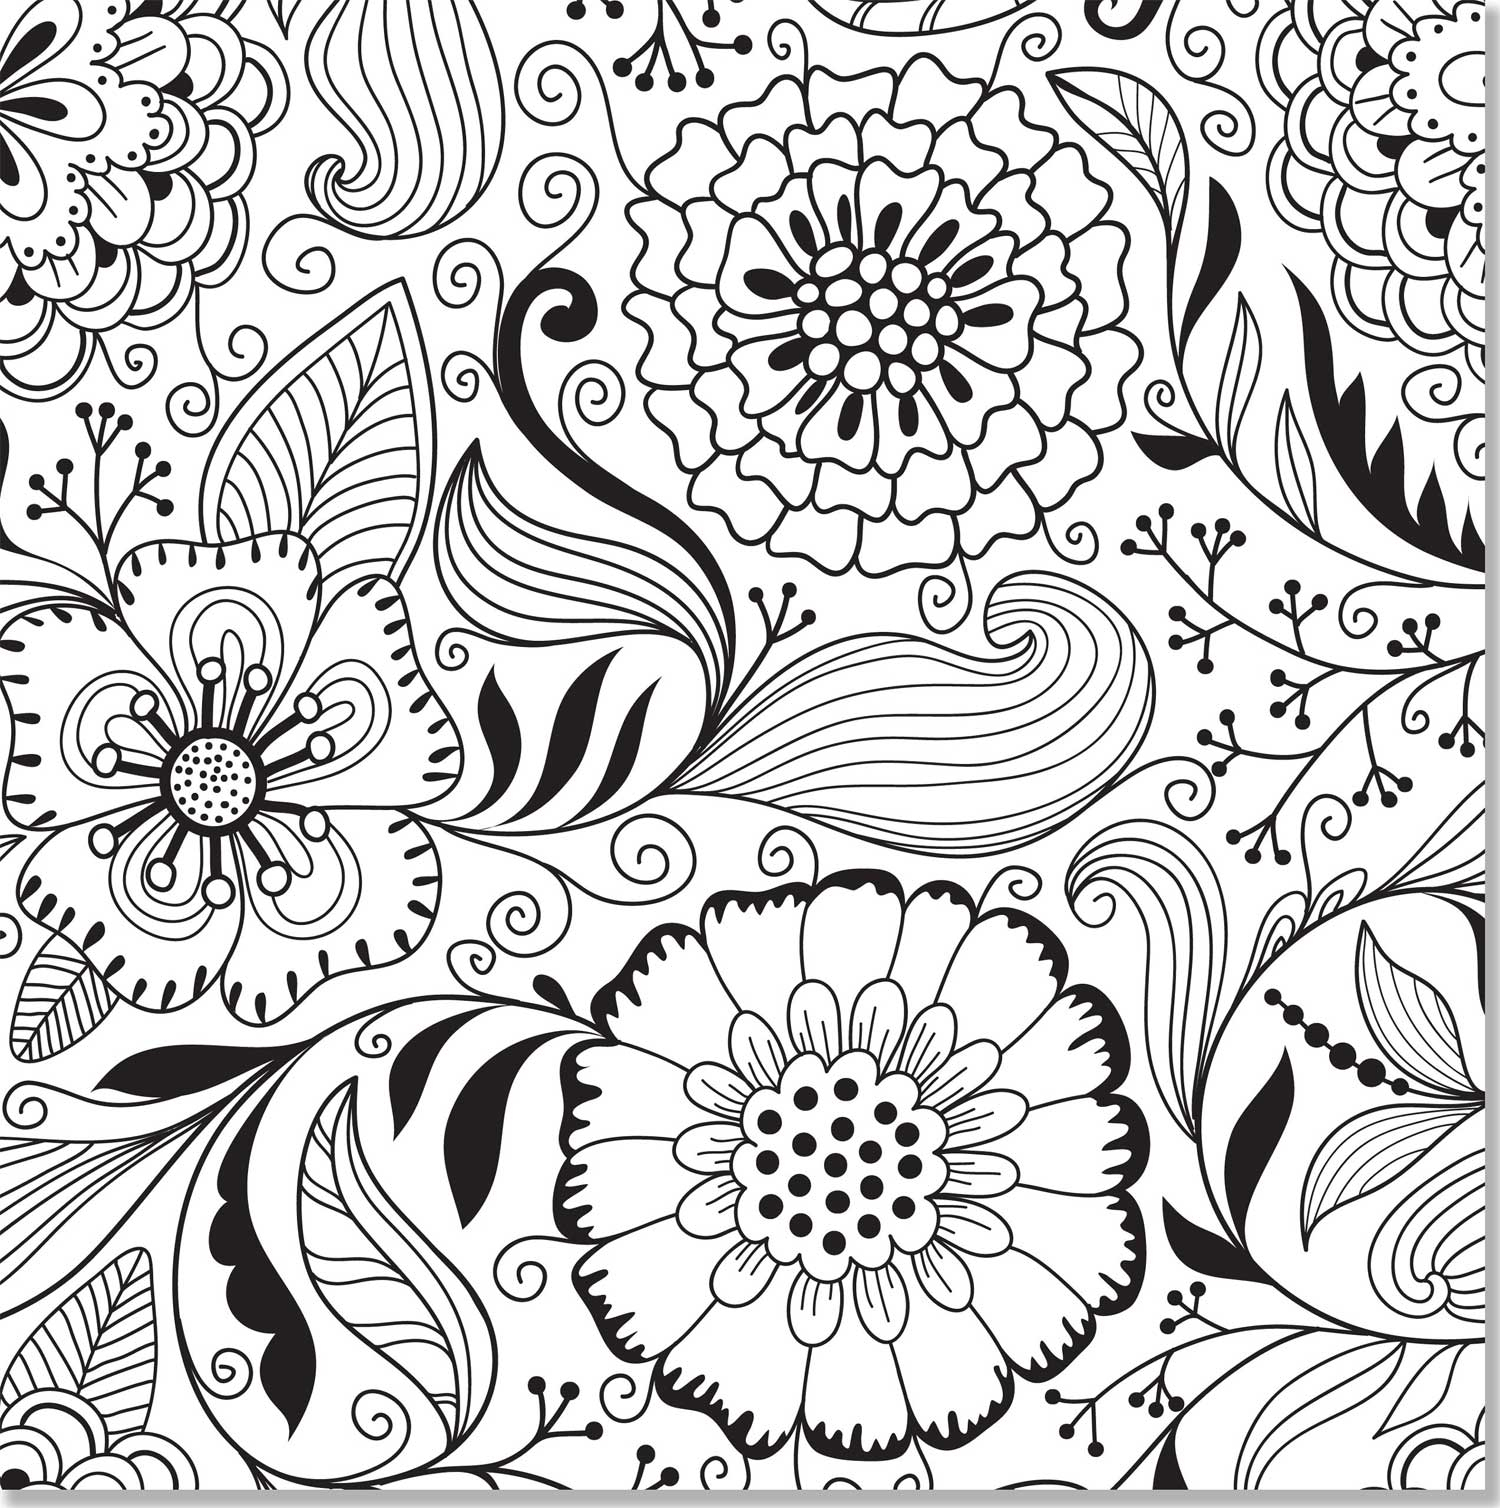 Free Printable Coloring Pages Adults Only - Coloring Home - Free Printable Coloring Pages For Adults Only